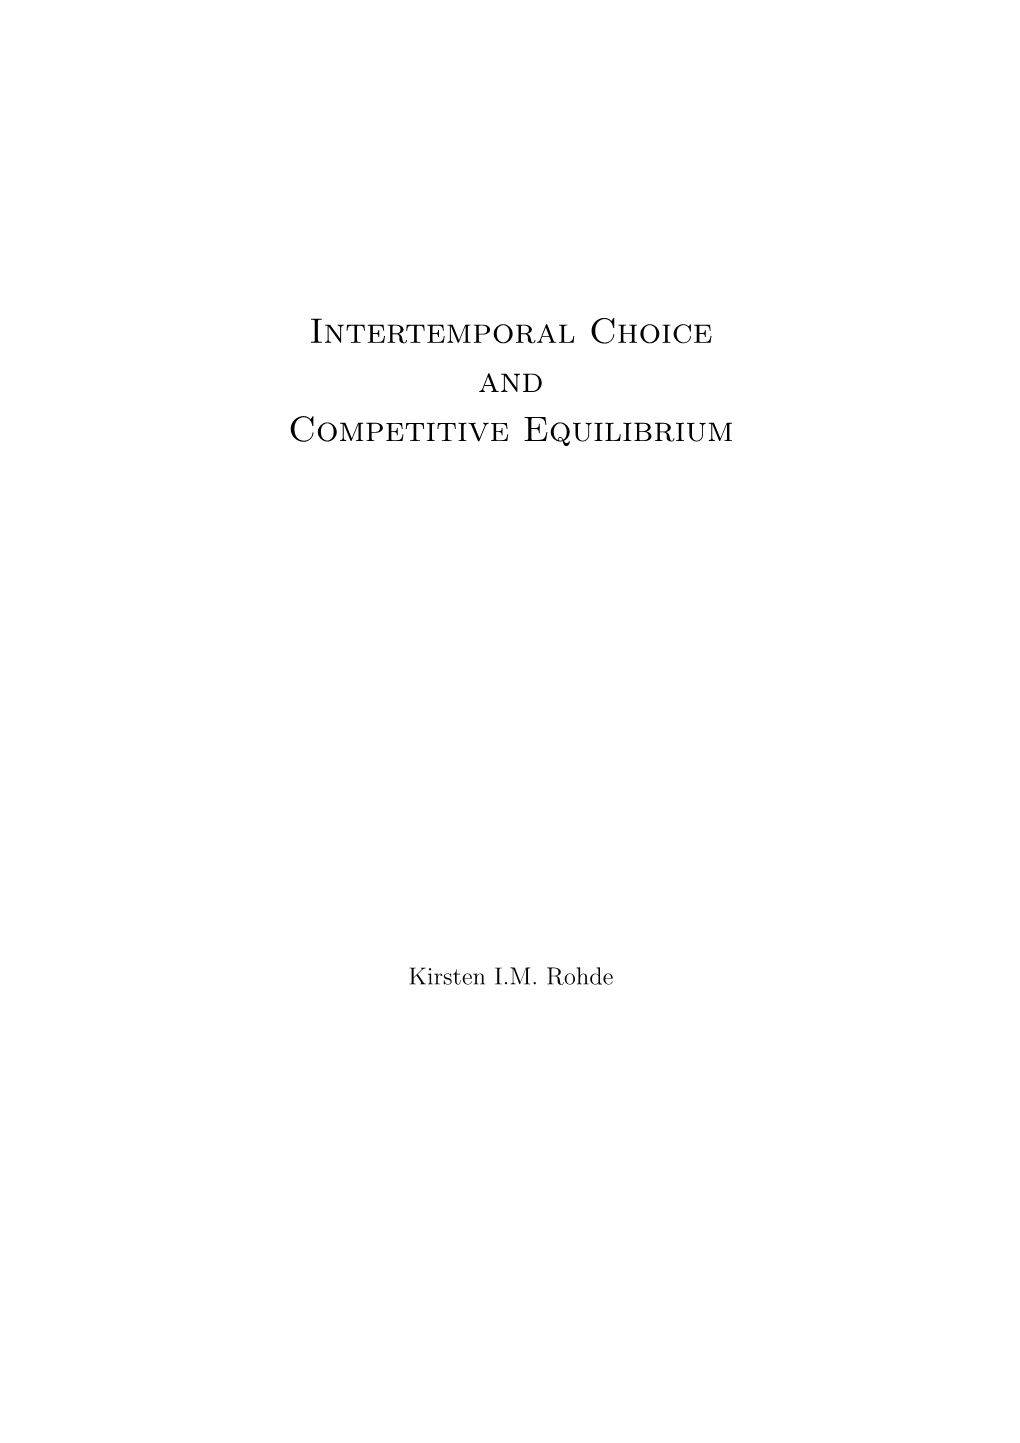 Intertemporal Choice and Competitive Equilibrium